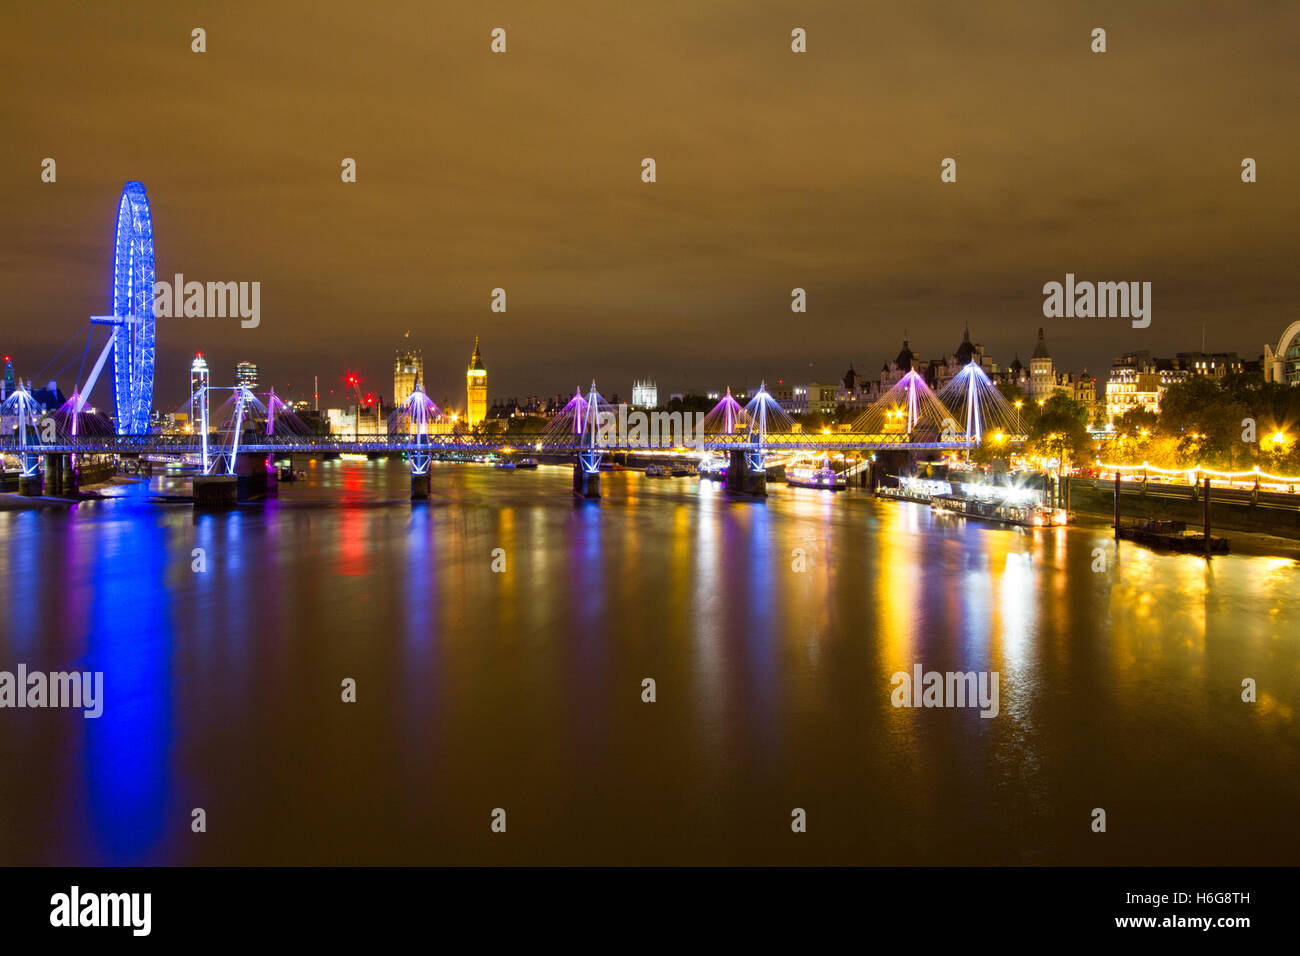 A nighttime photo taken from Waterloo Bridge looking along the River Thames towards the London Eye and Big Ben. Stock Photo